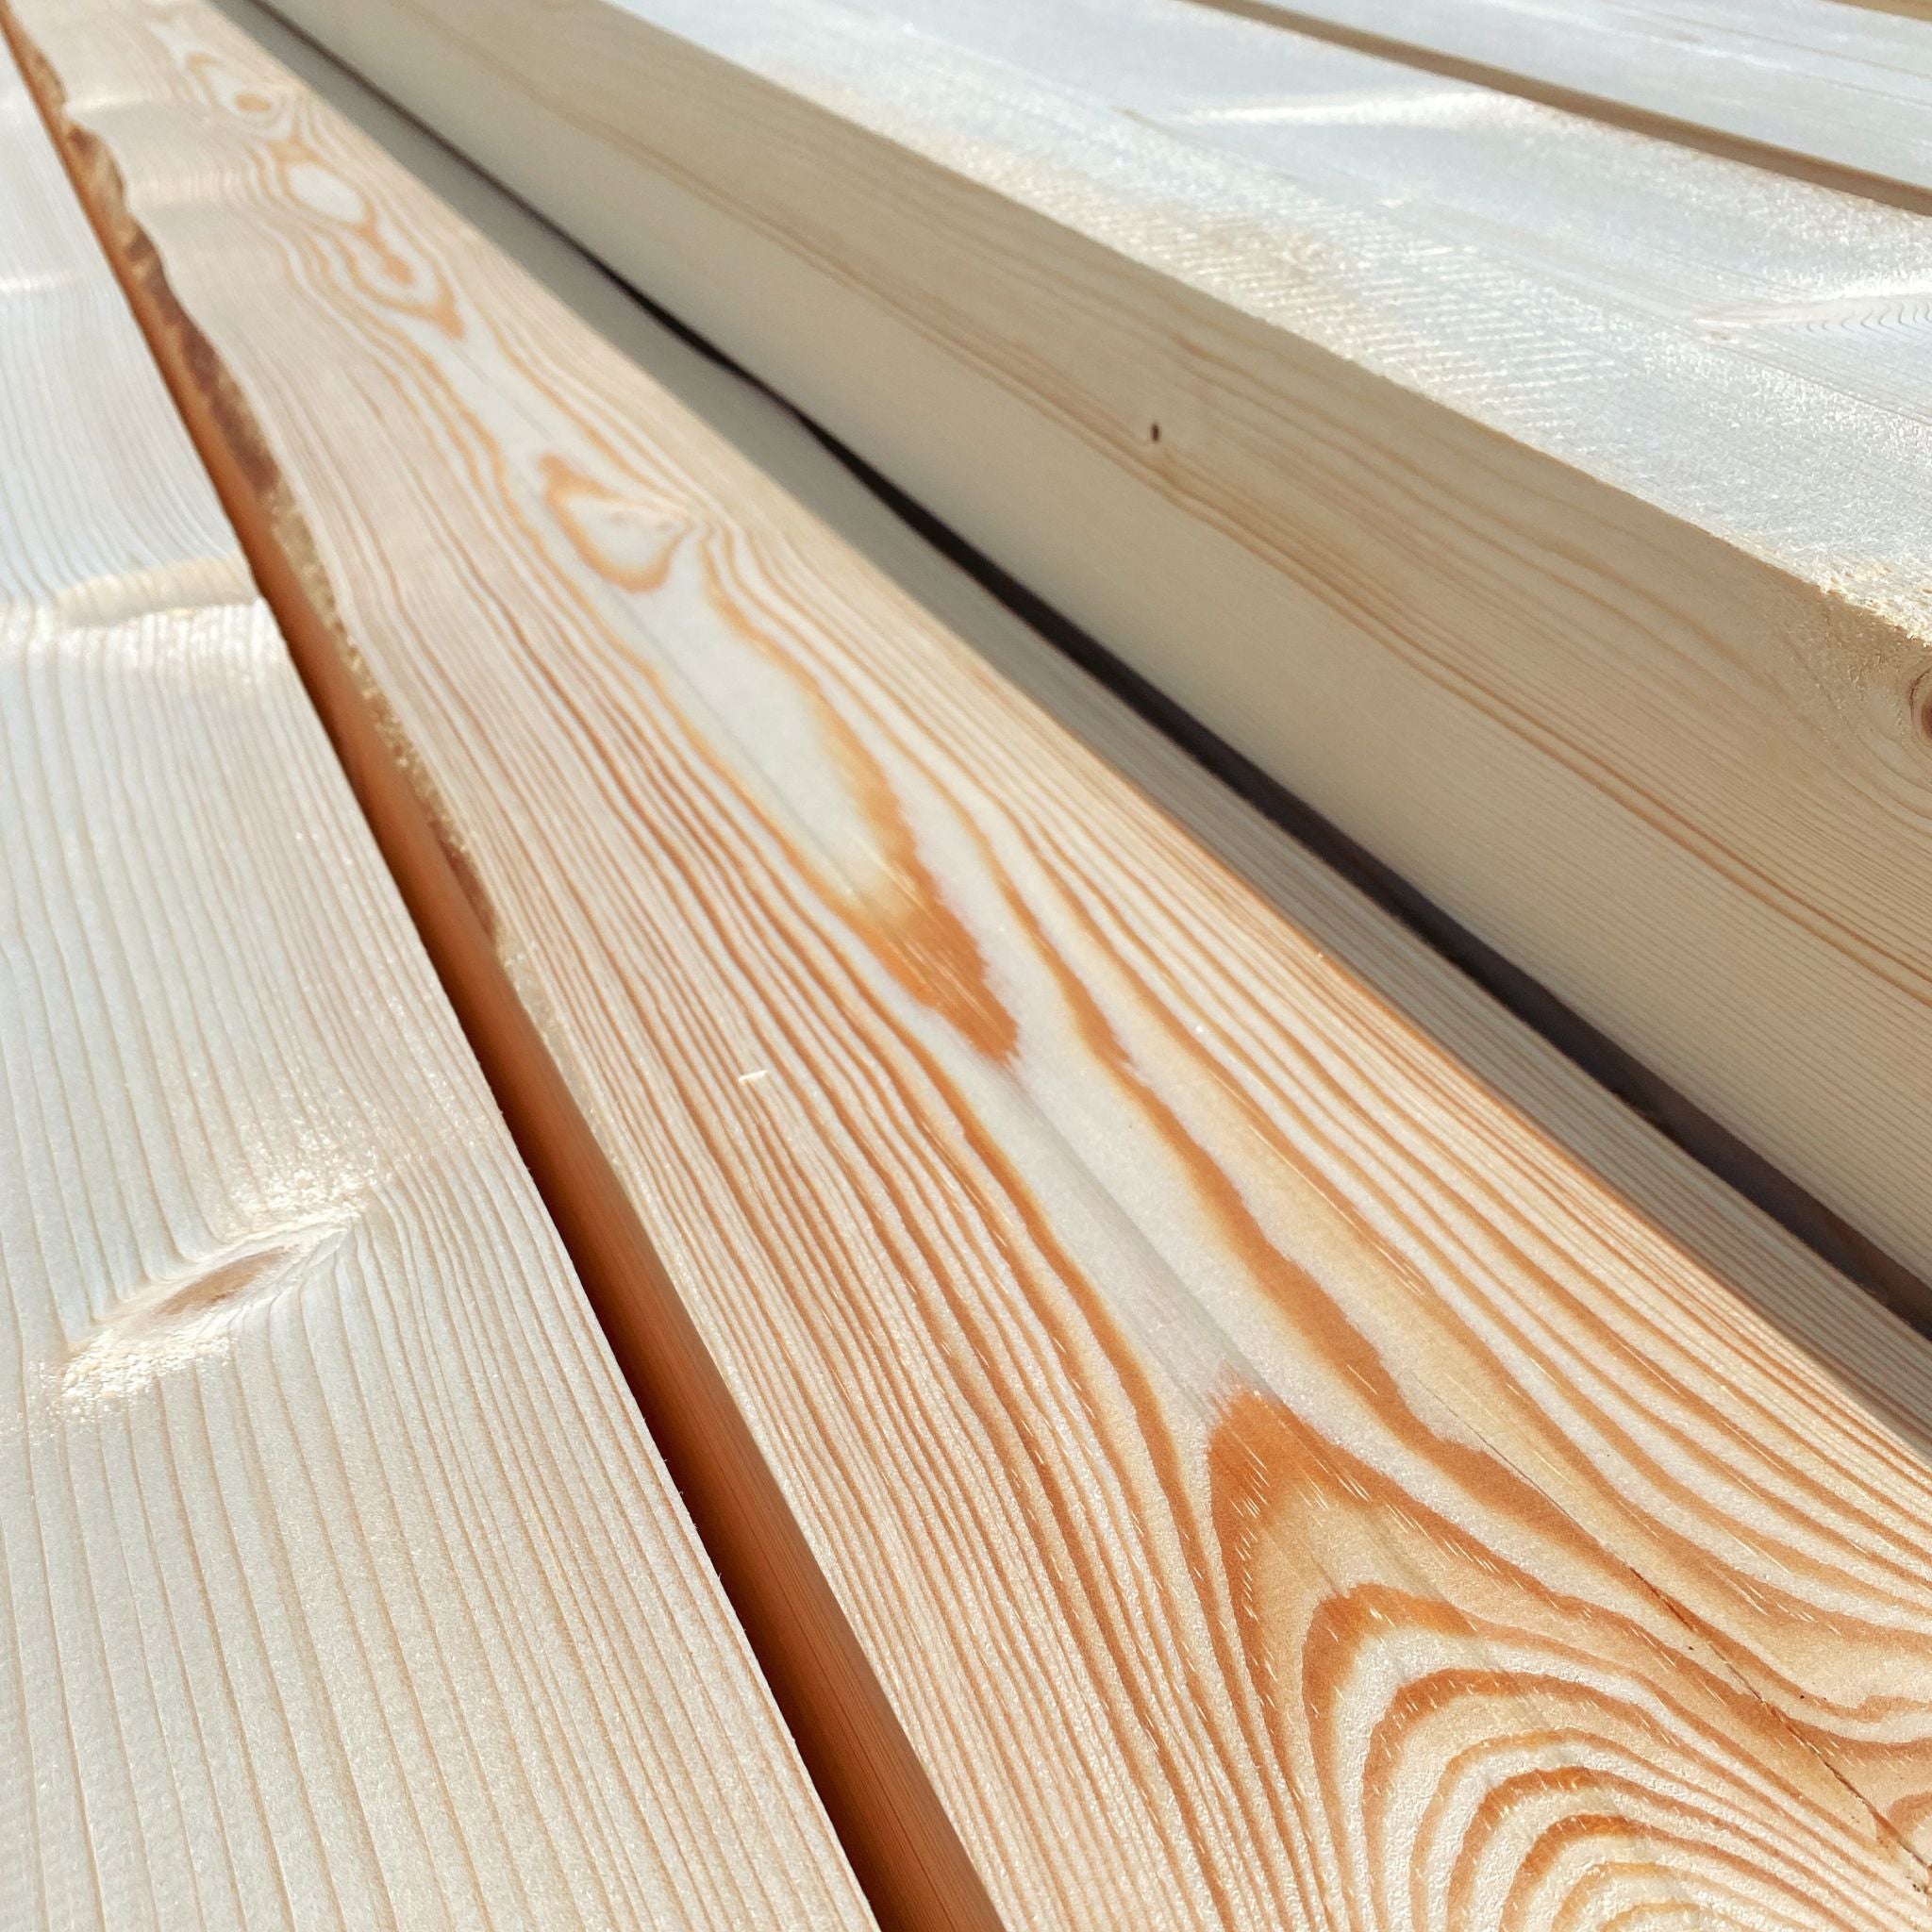 Thickness 45mm - Planed Spruce